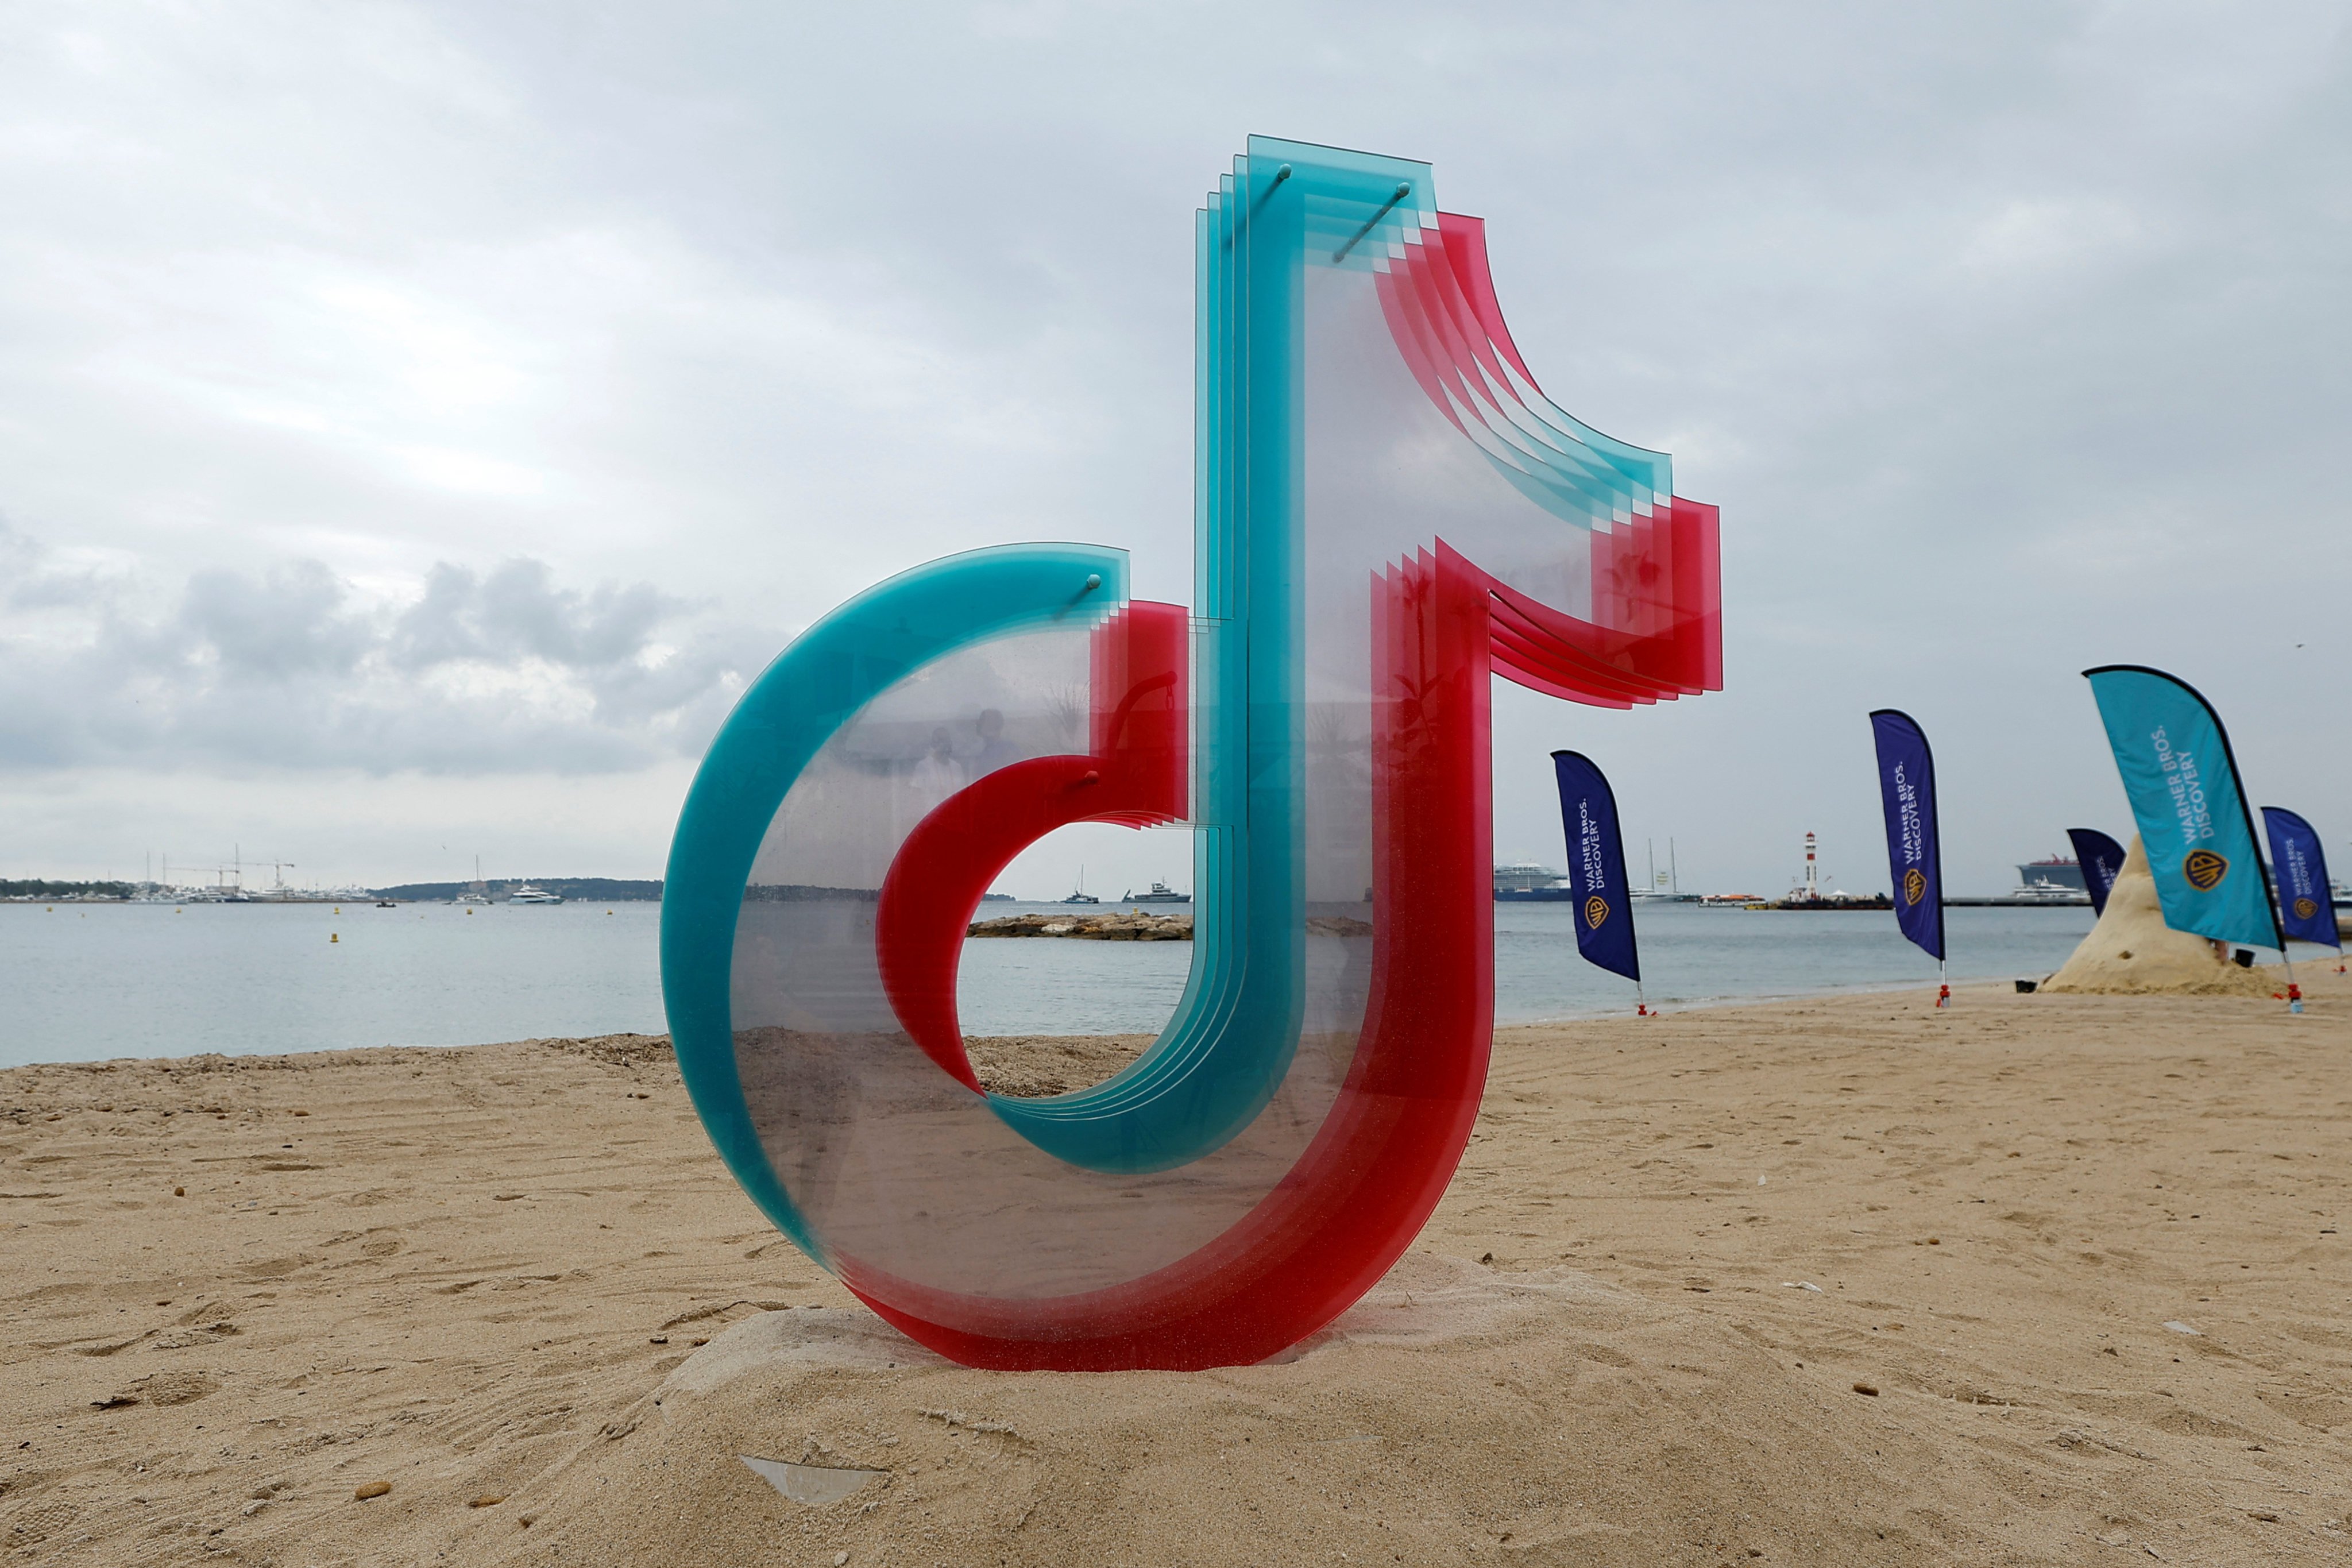 TikTok’s logo is seen on the beach during the Cannes Lions International Festival of Creativity in Cannes, France, on June 22, 2022. Photo: Reuters